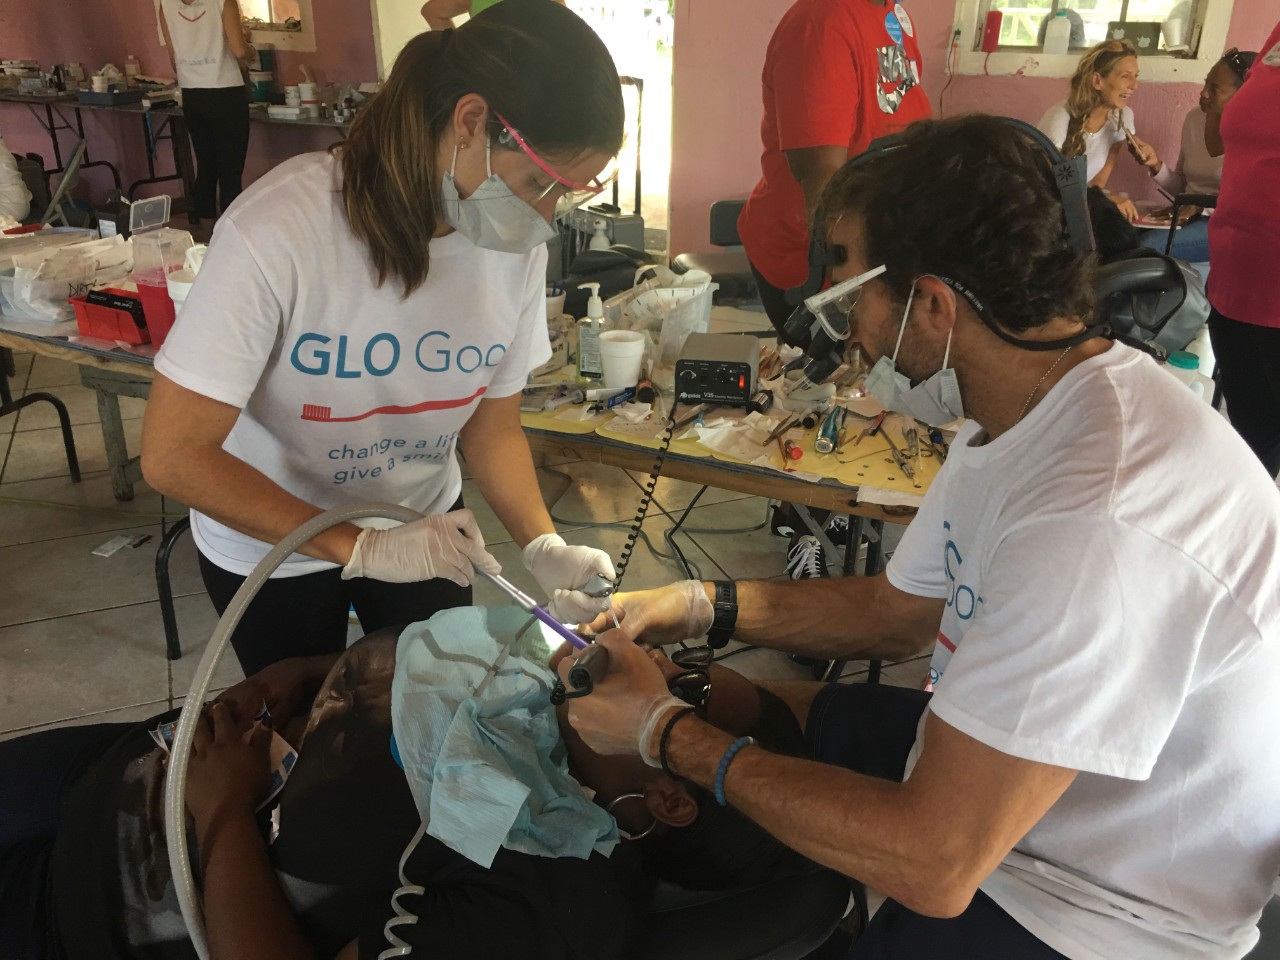 #IGiveBeyond Jonathan Levine’s GLO Good Foundation and musician Lenny Kravitz’s Let Love Rule bring free oral health care and education to hundreds of people.